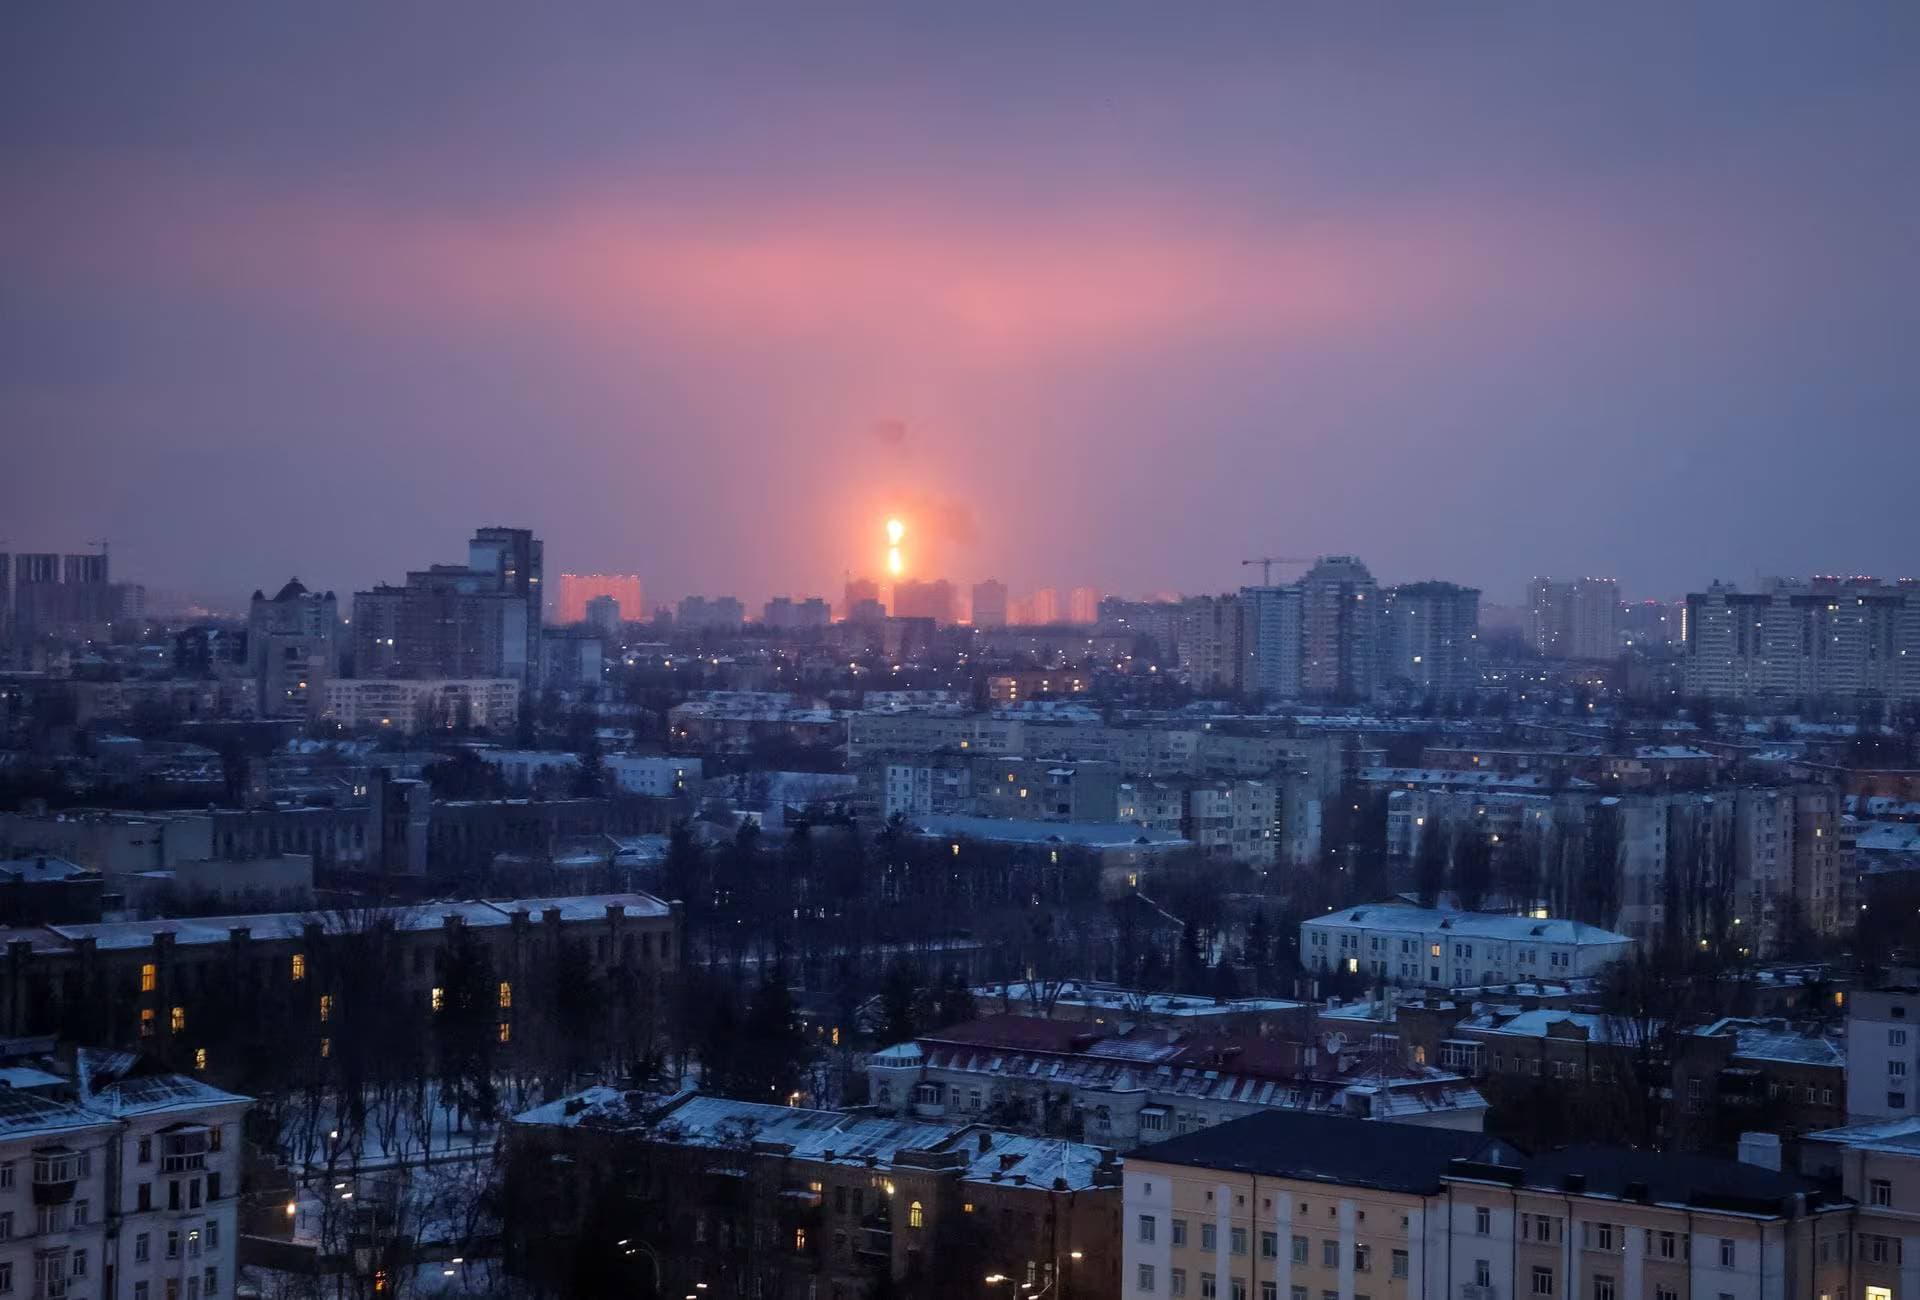 An explosion of a missile is seen in the sky over the city during a Russian missile strike in Kyiv